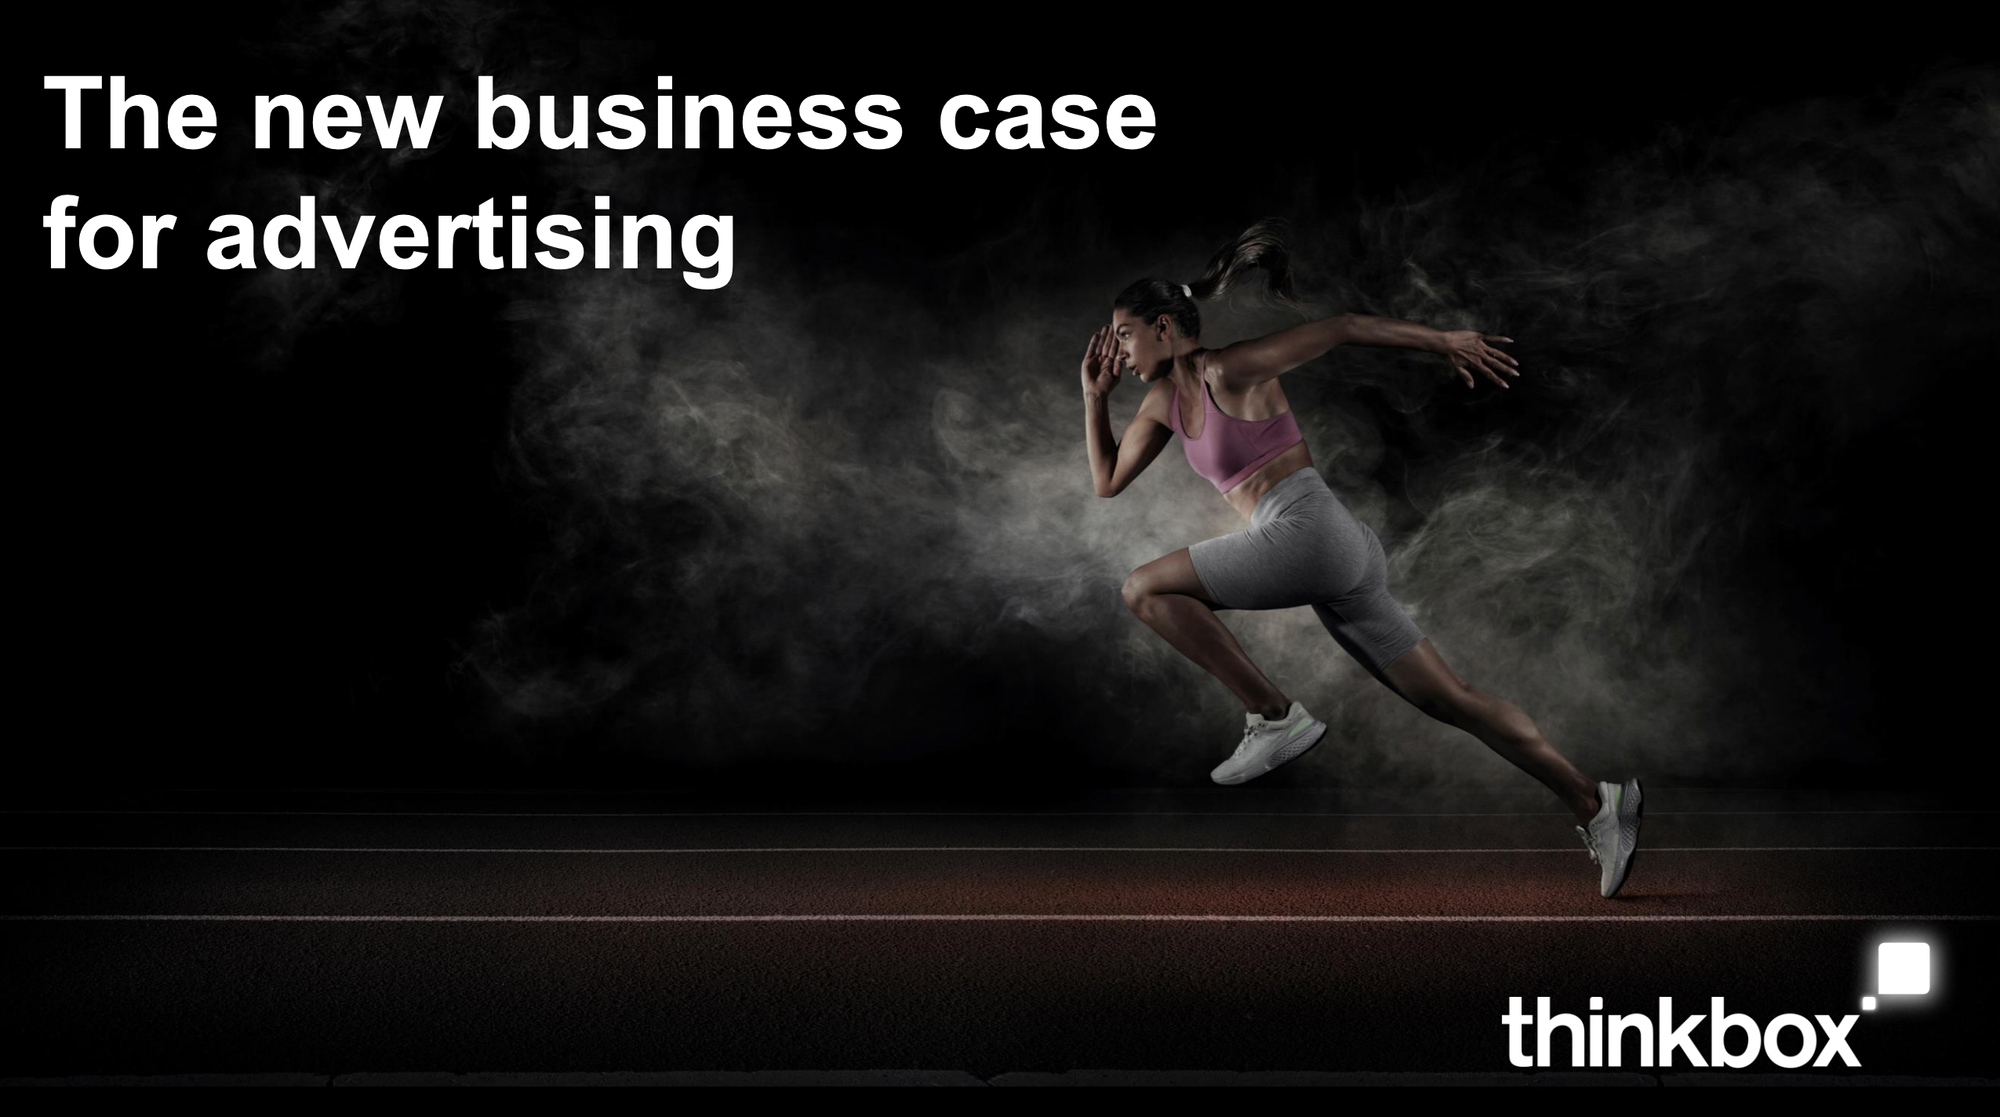 Thinkbox - new business case for advertising